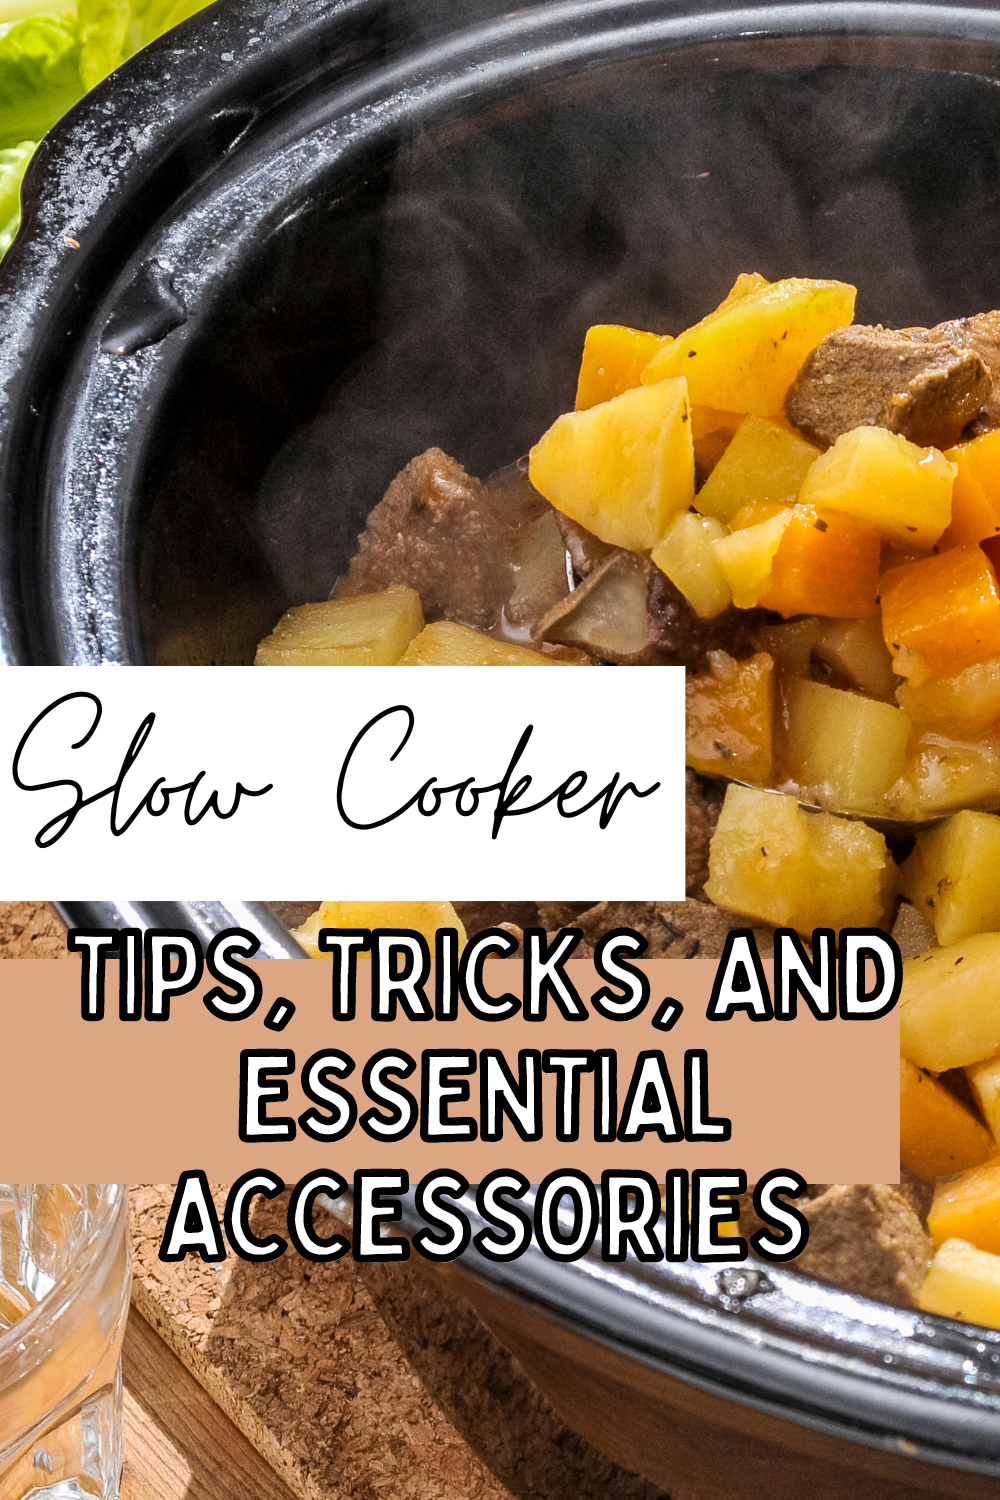 Maximize Your Slow Cooker: Tips and Tricks for Tasty Meals